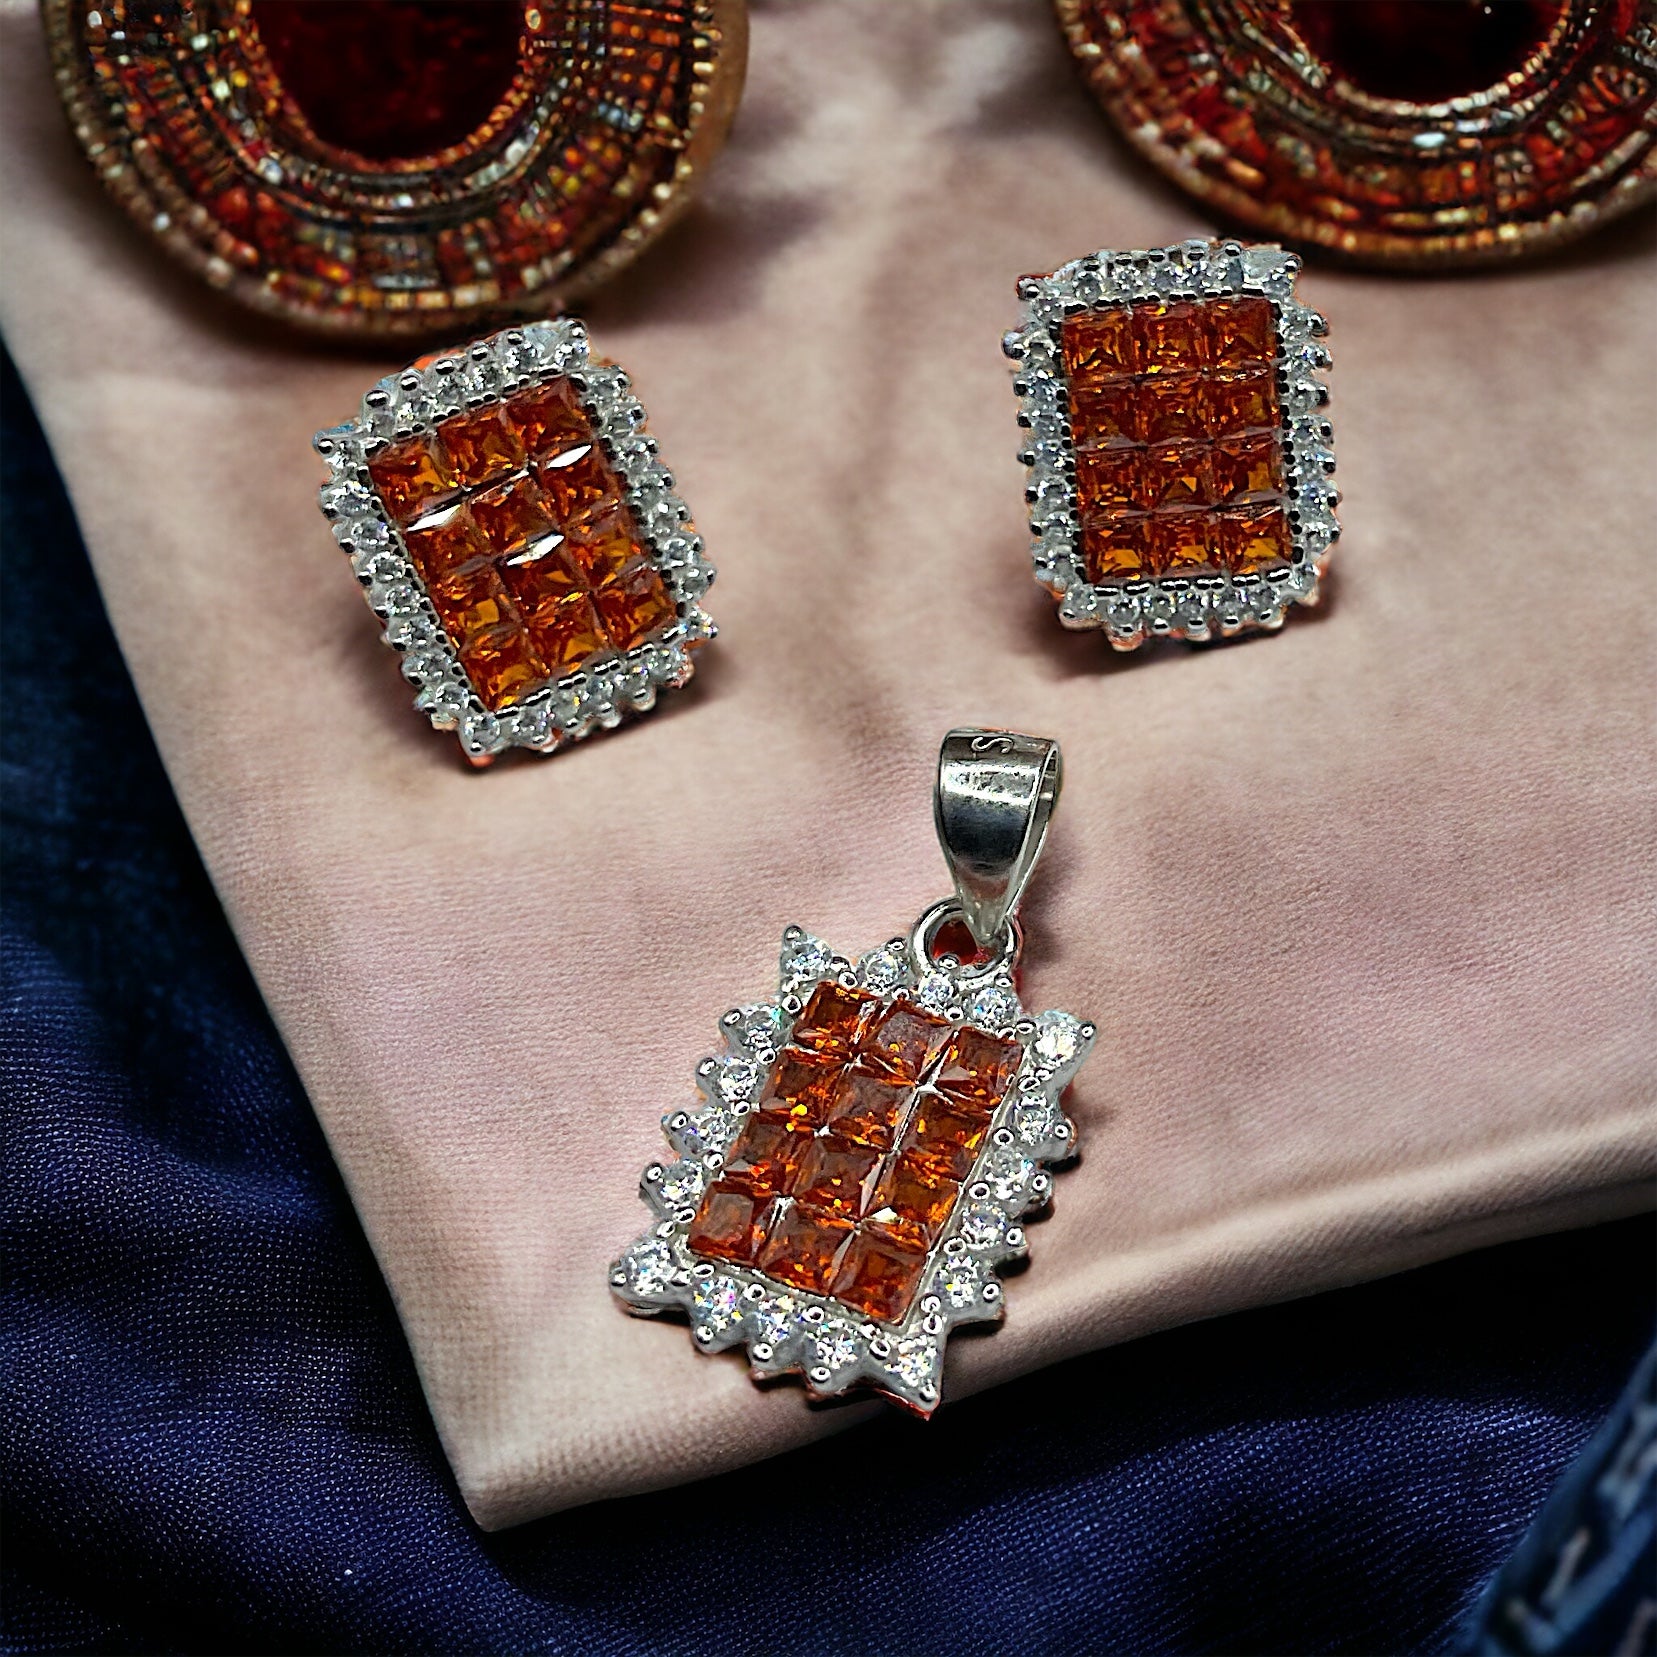 a close up of a necklace and earrings on a cloth